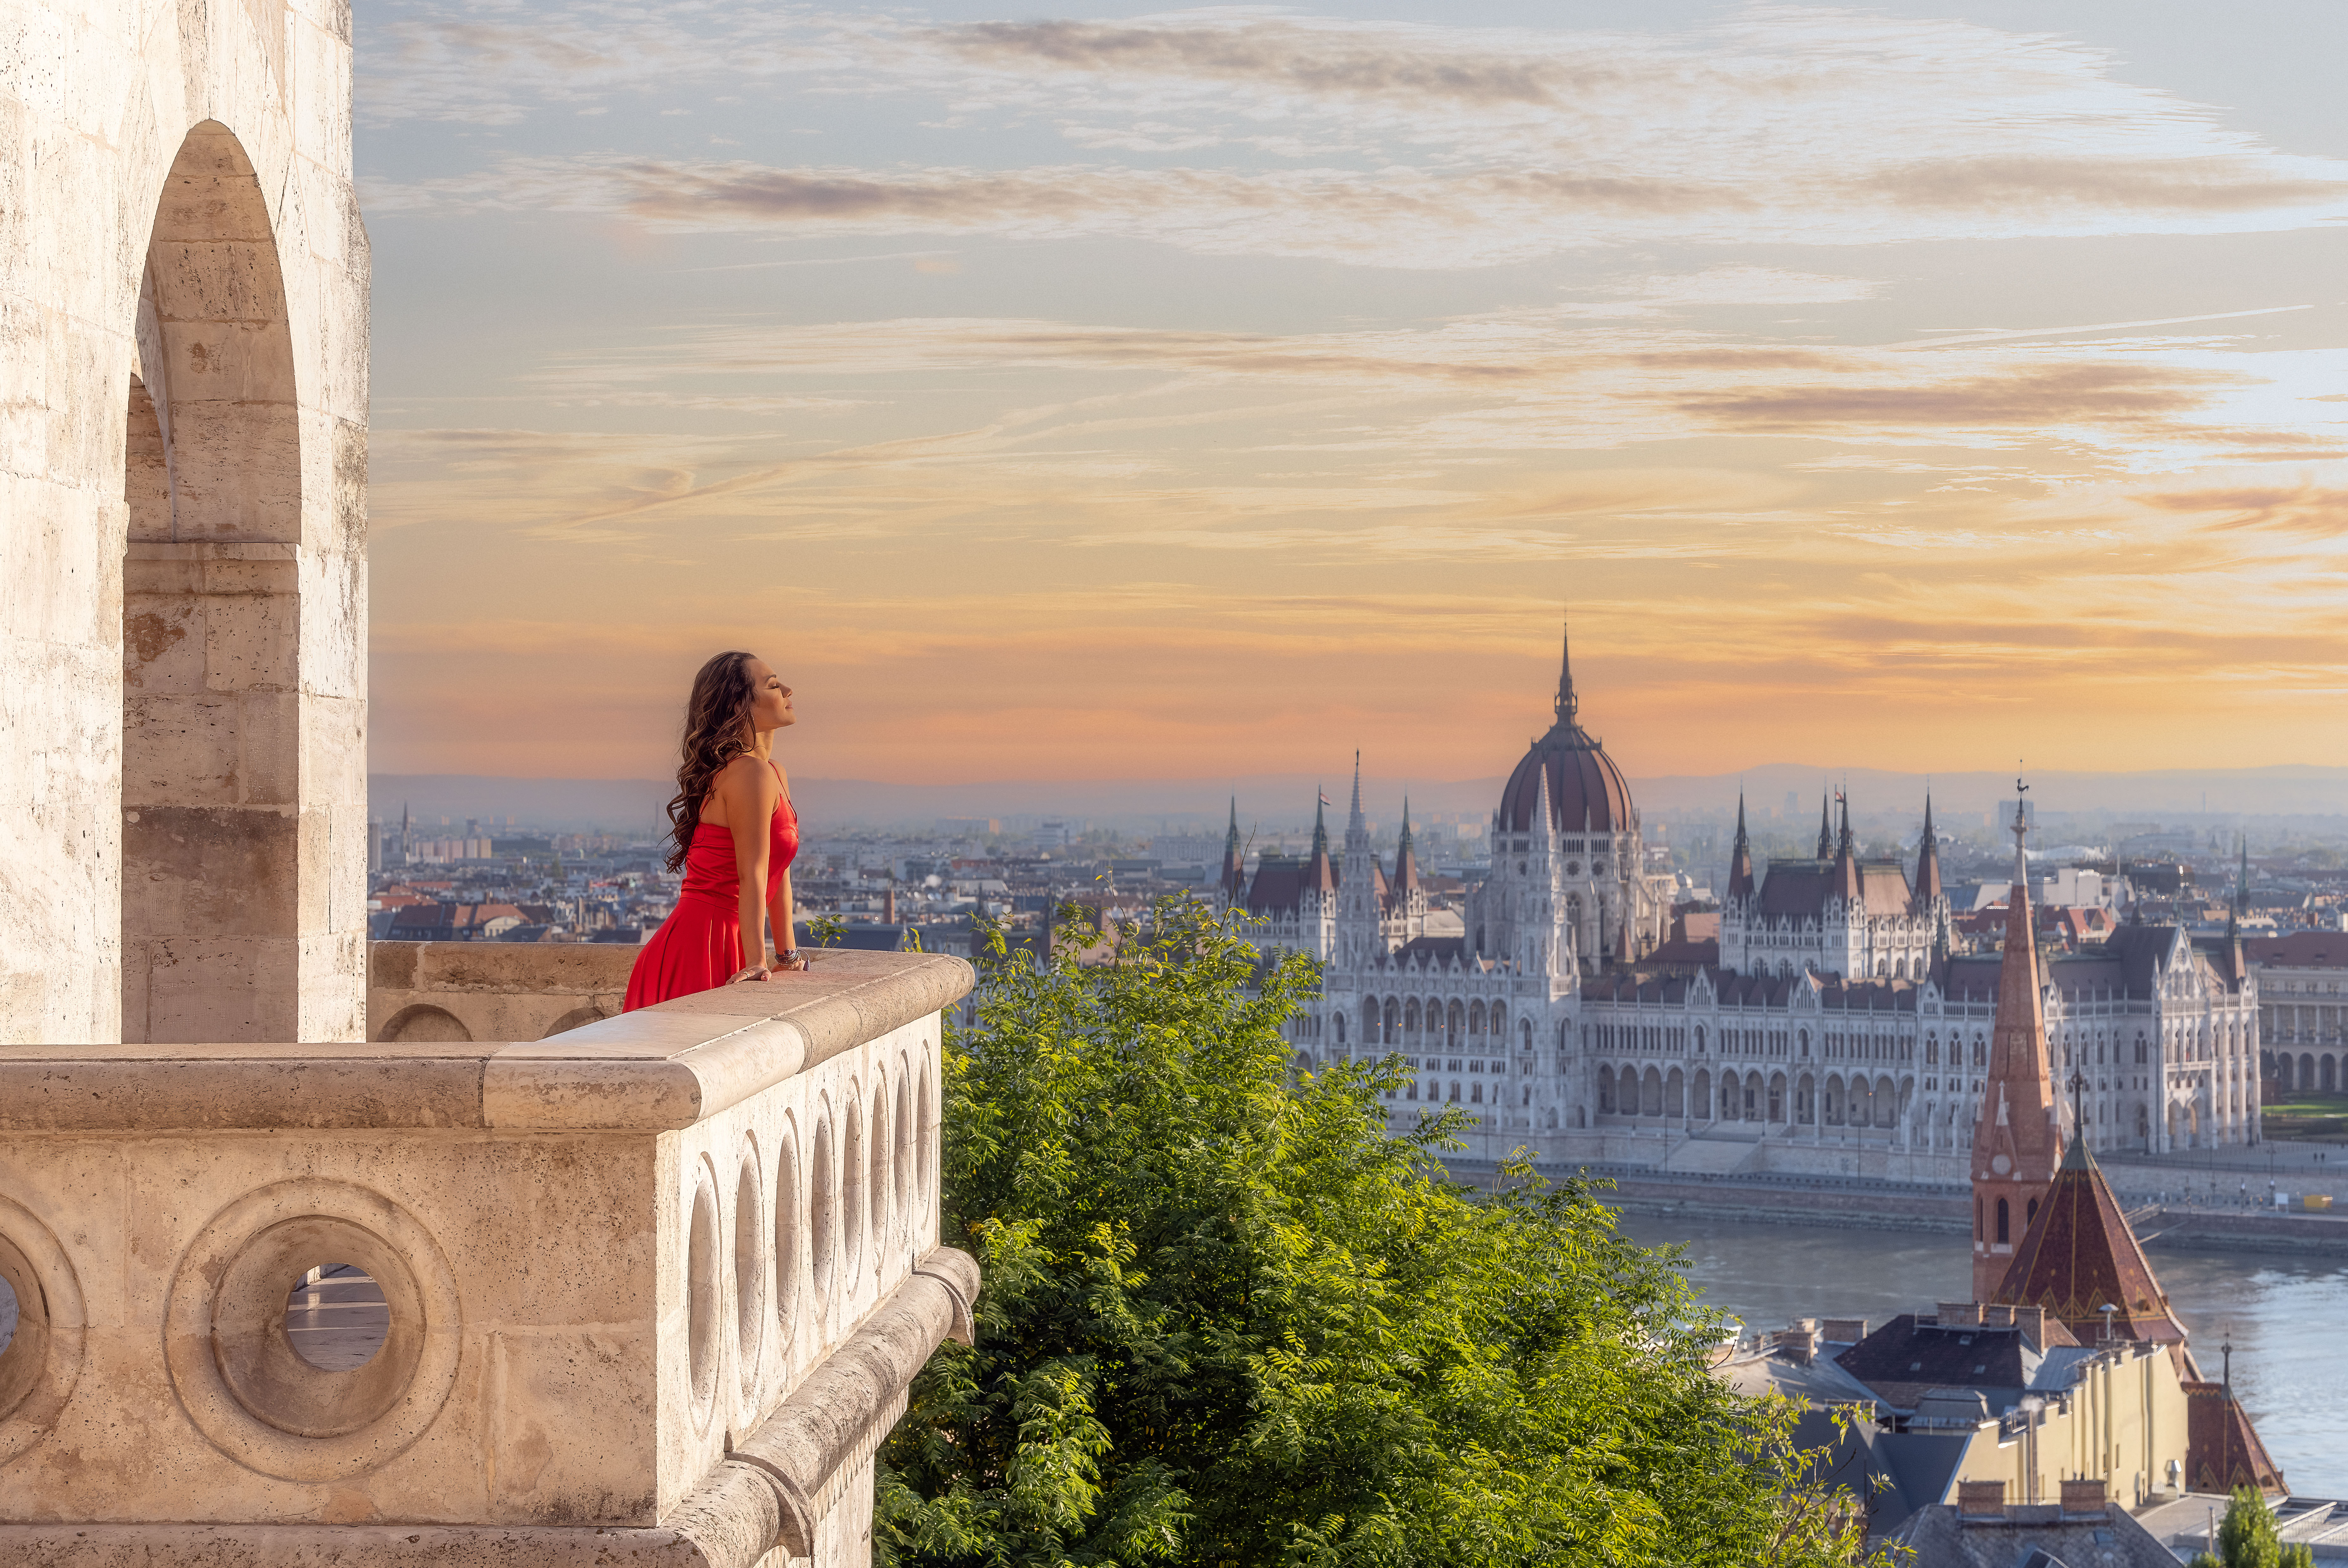 Overlooking the Danube and Budapest Parliament